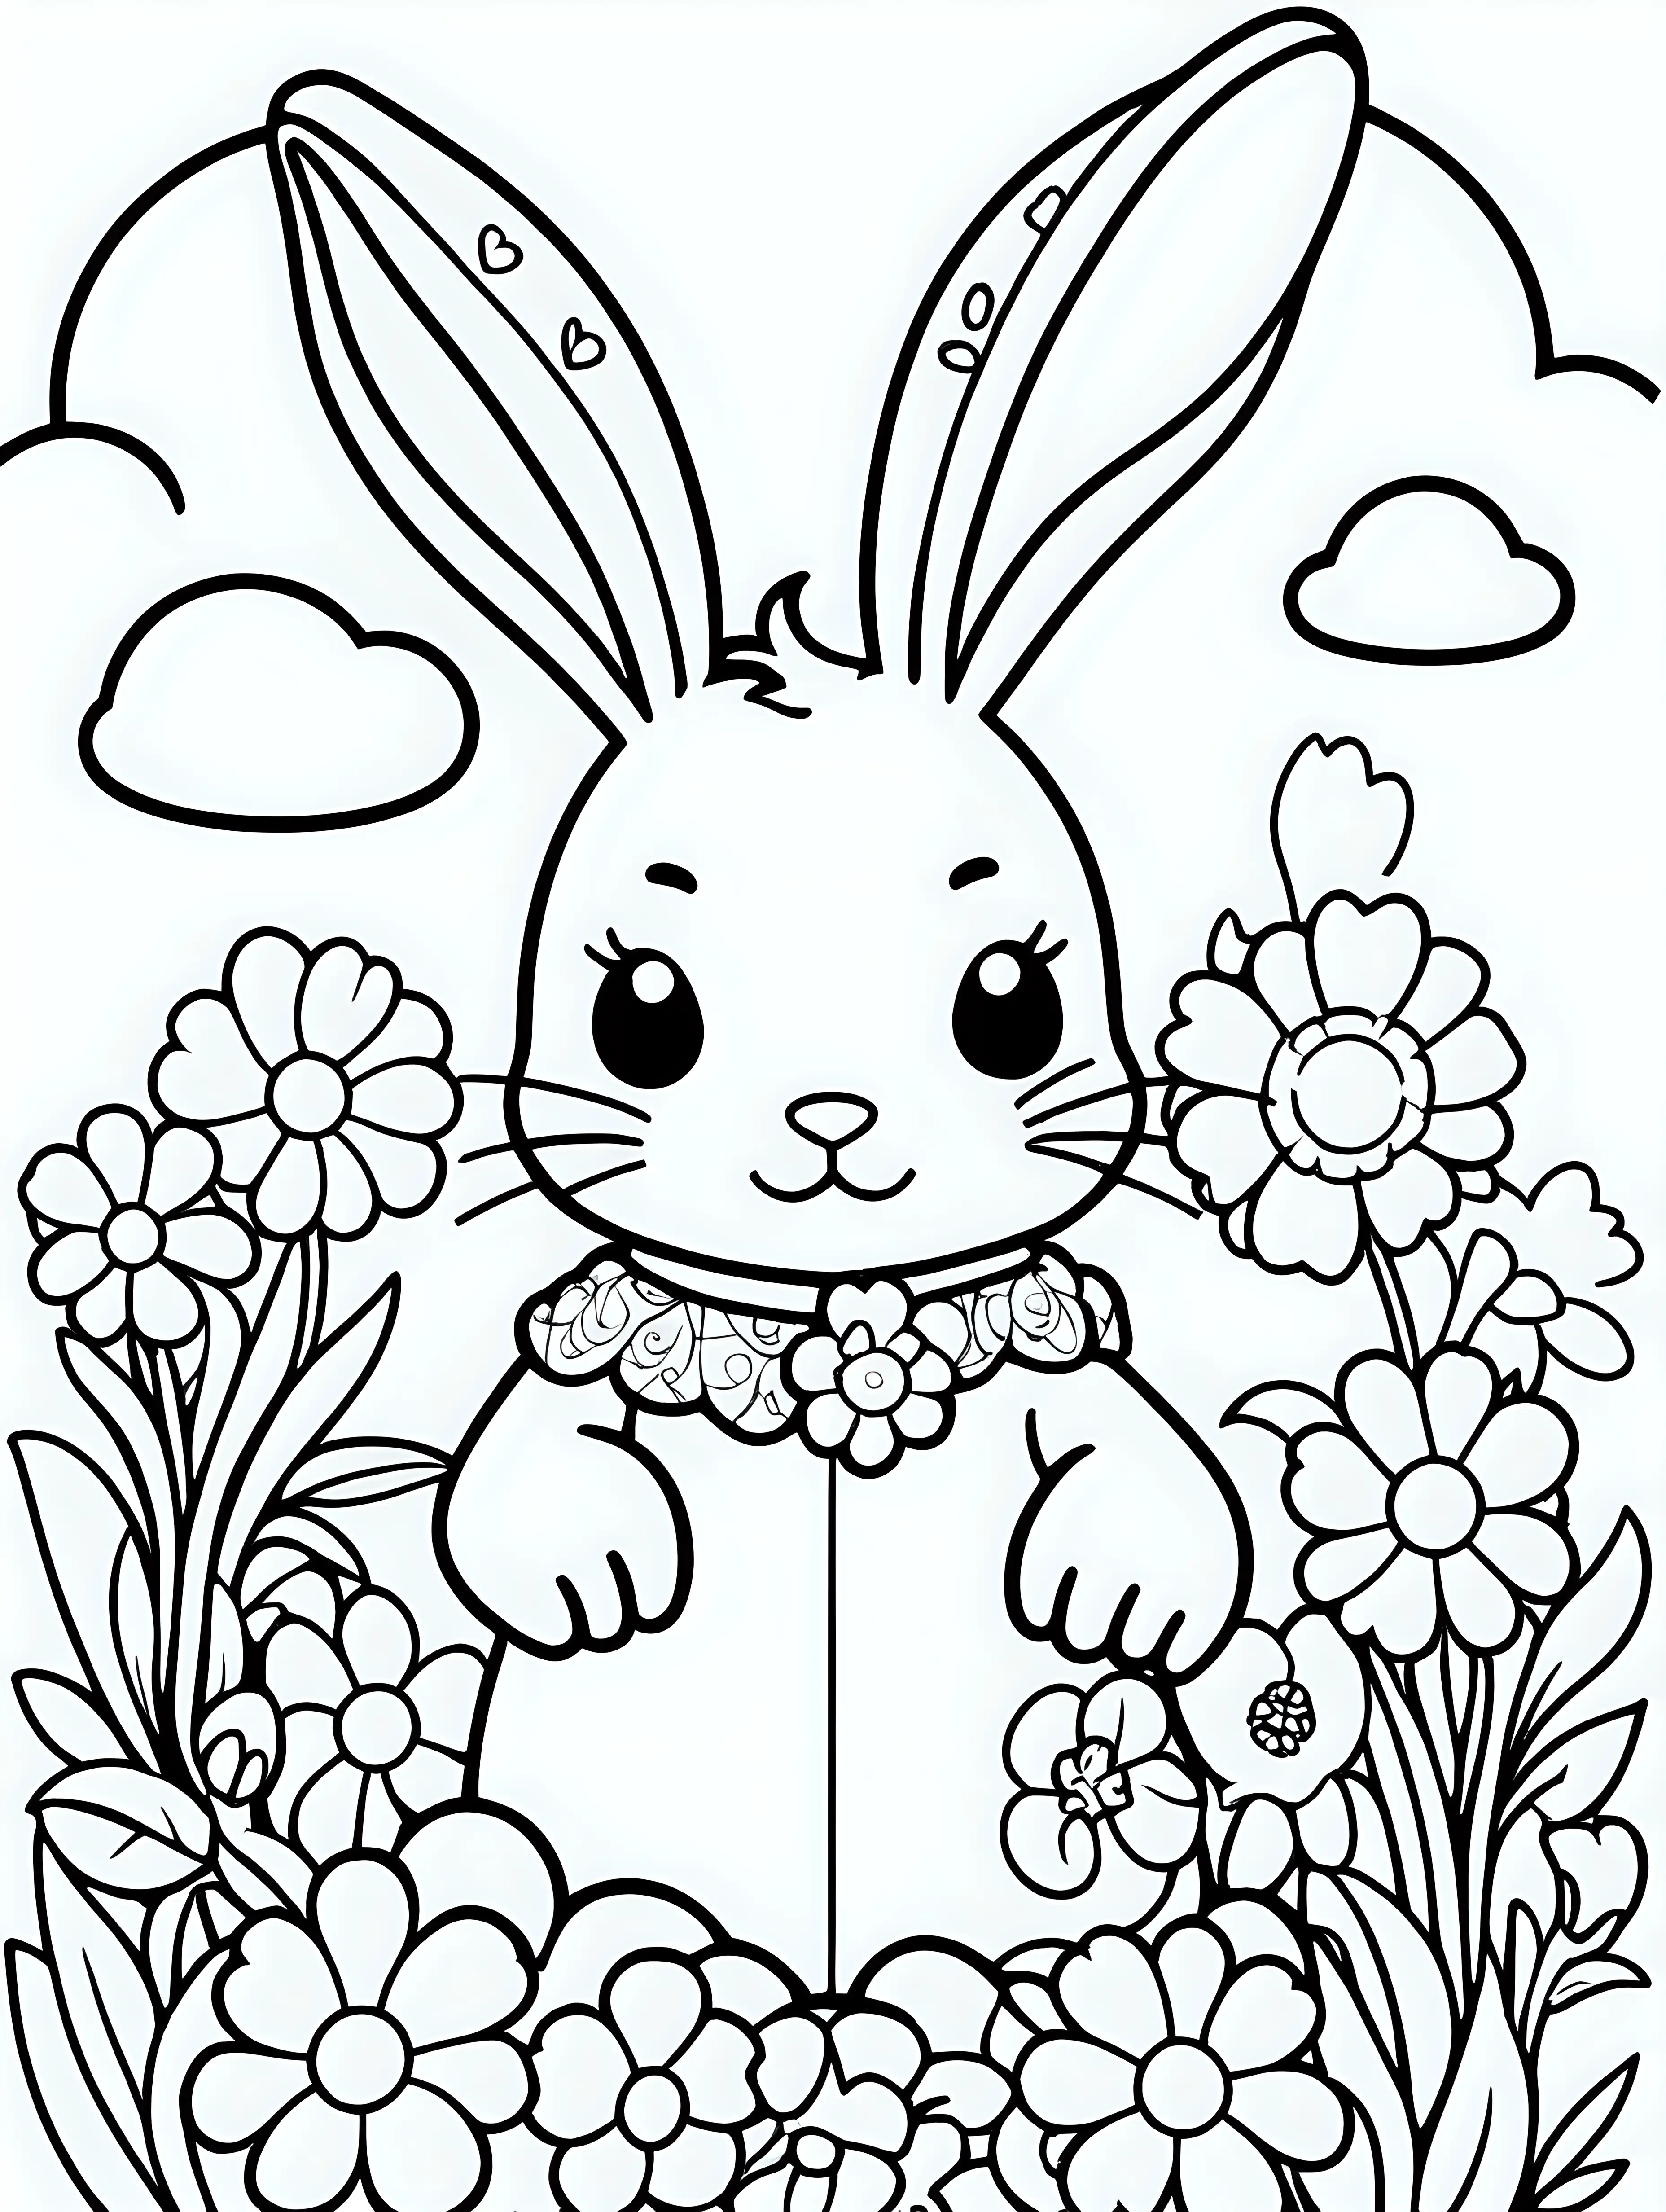 Adorable Kawaii Bunny Coloring Page with Floral Delight